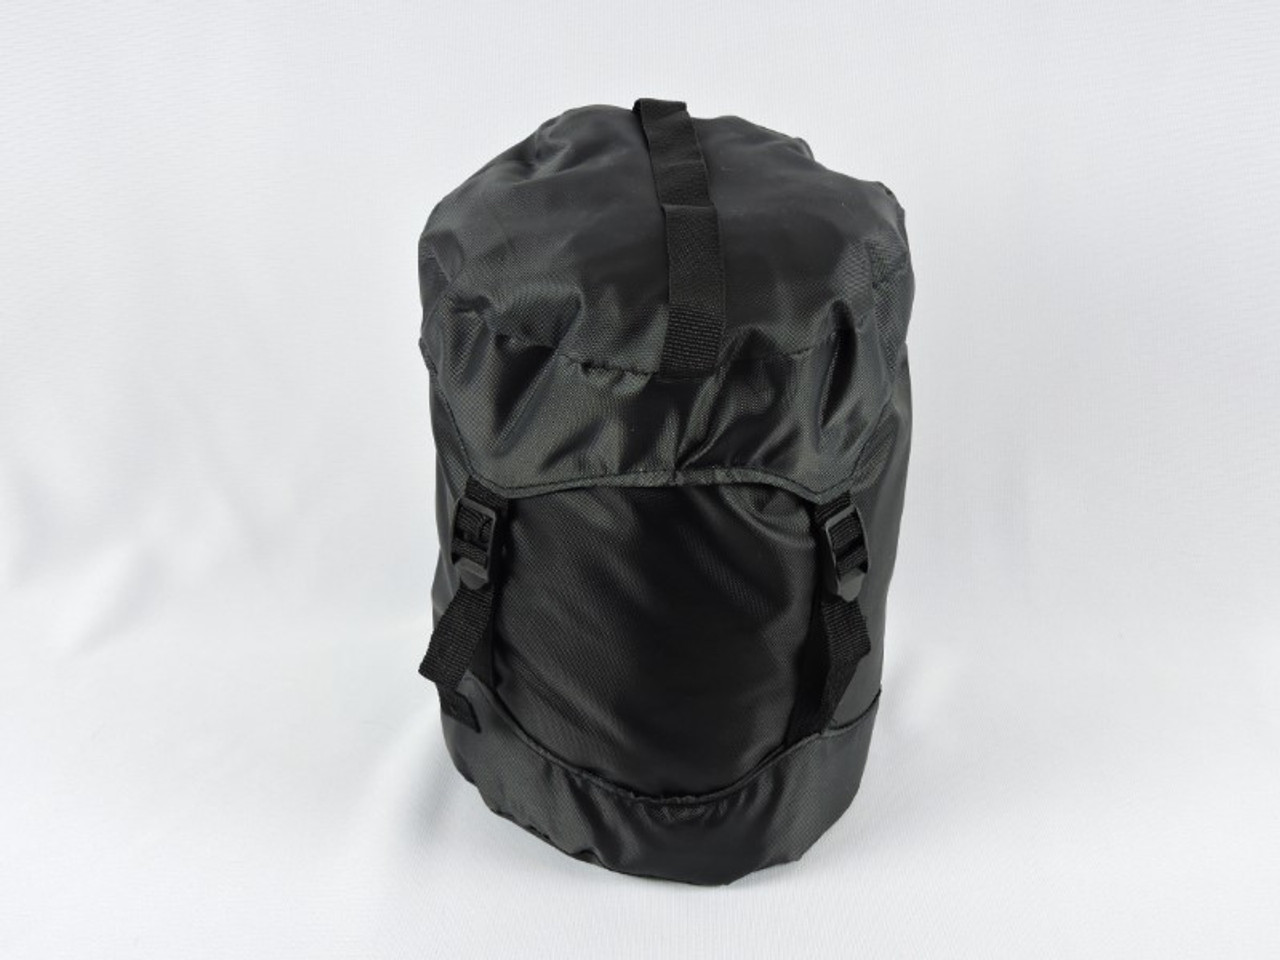 Handy and durable compression bag for compact storage.